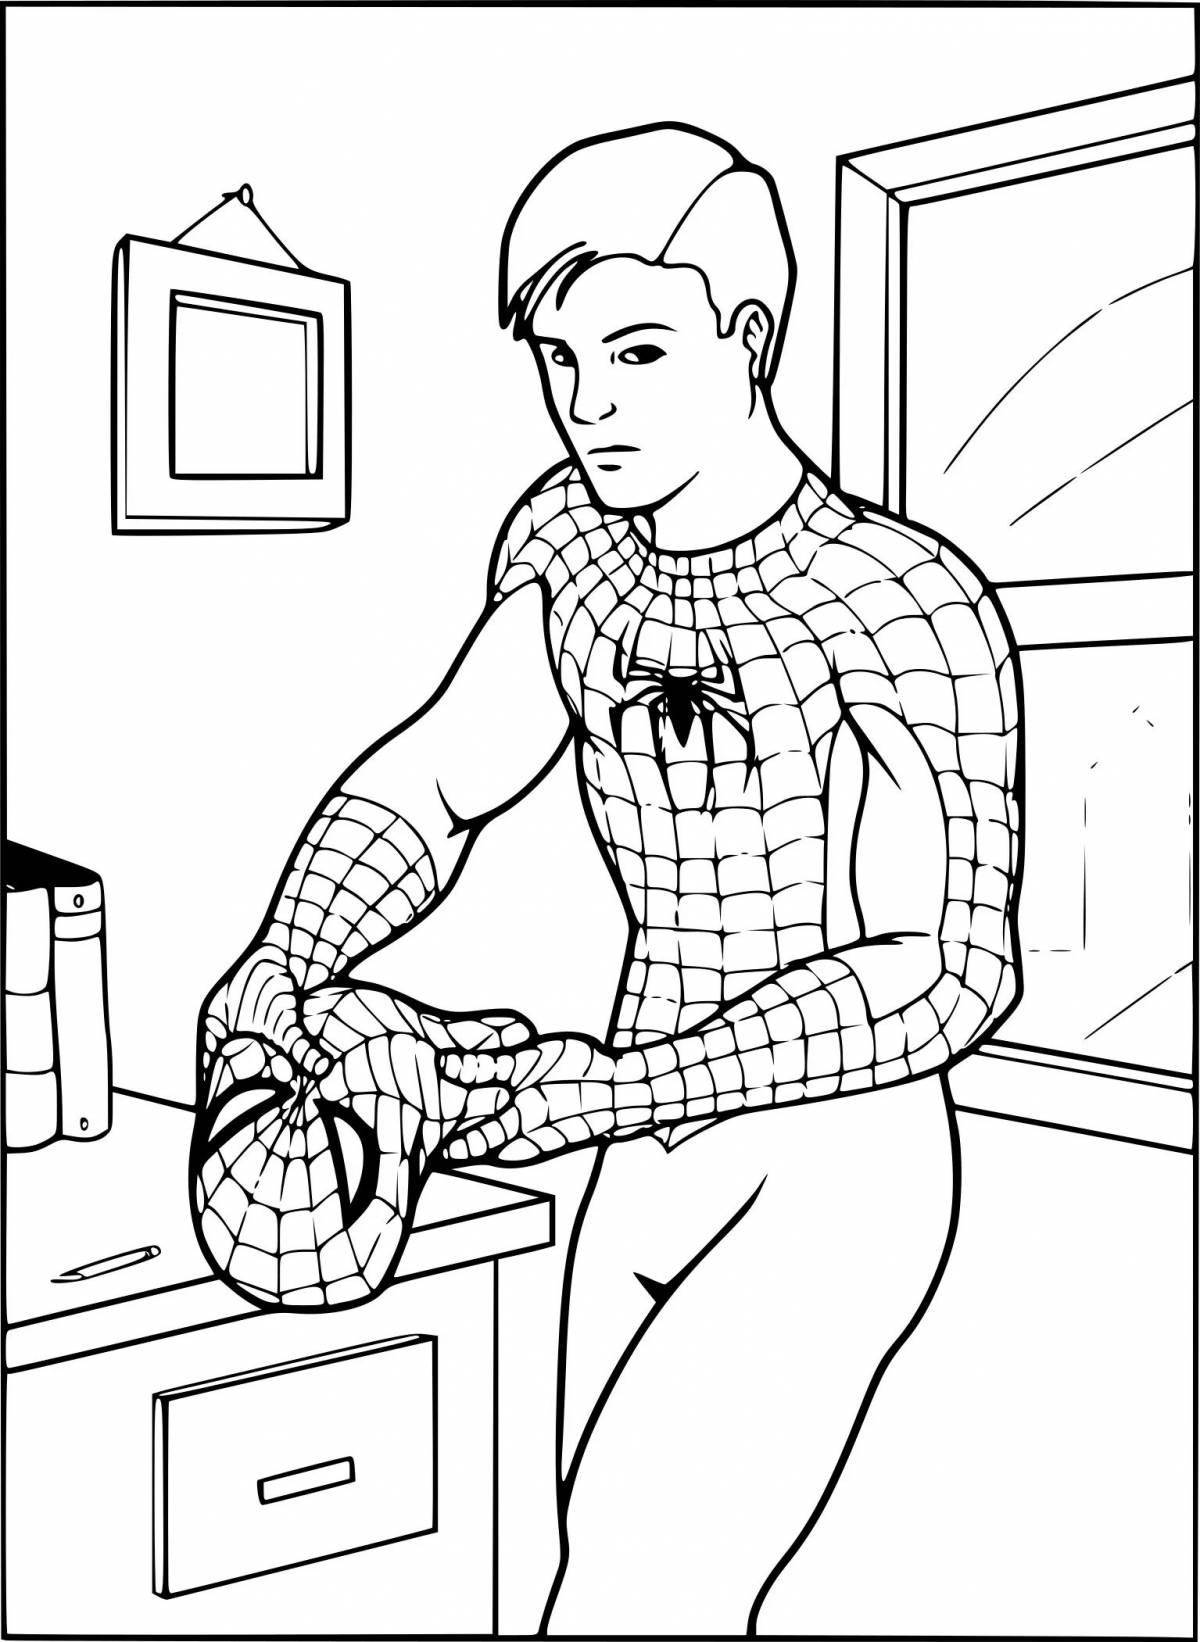 Peter parker's playful coloring page